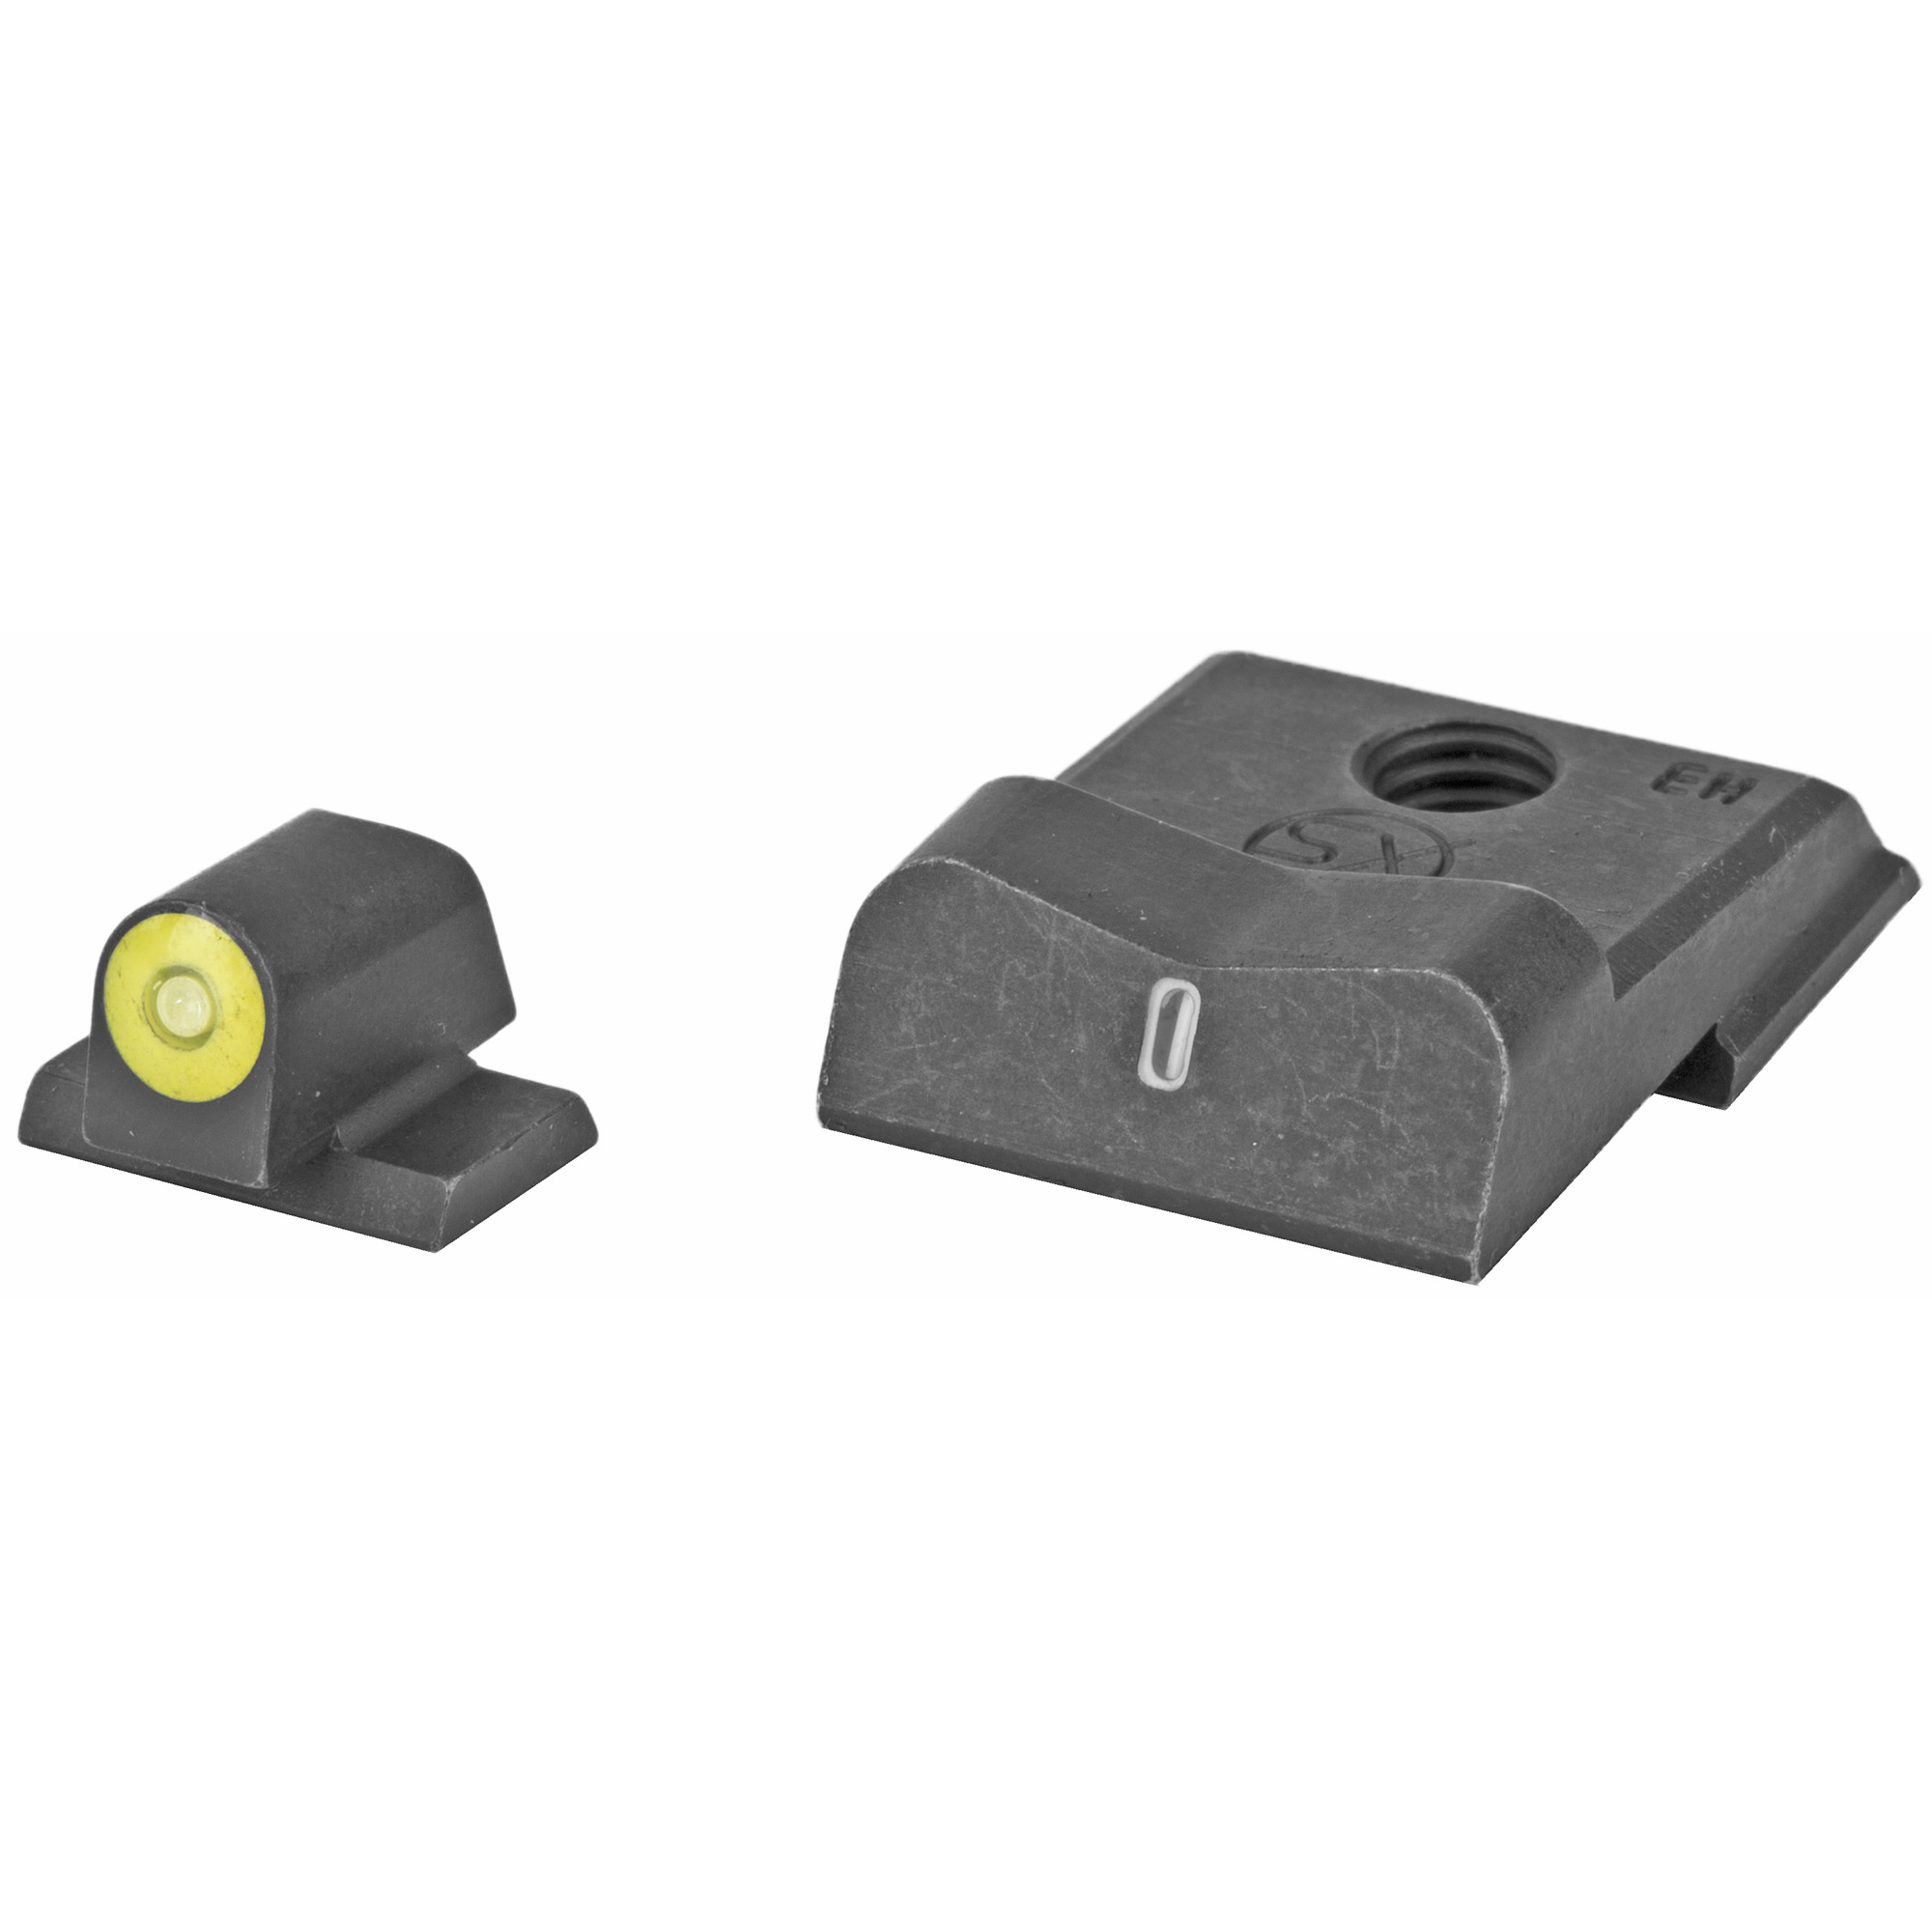 XS Sights, DXT2 Big Dot Tritium Front, White Stripe Express Rear, Fits S&W M&P 9 SHIELD EZ, Green with Yellow Outline